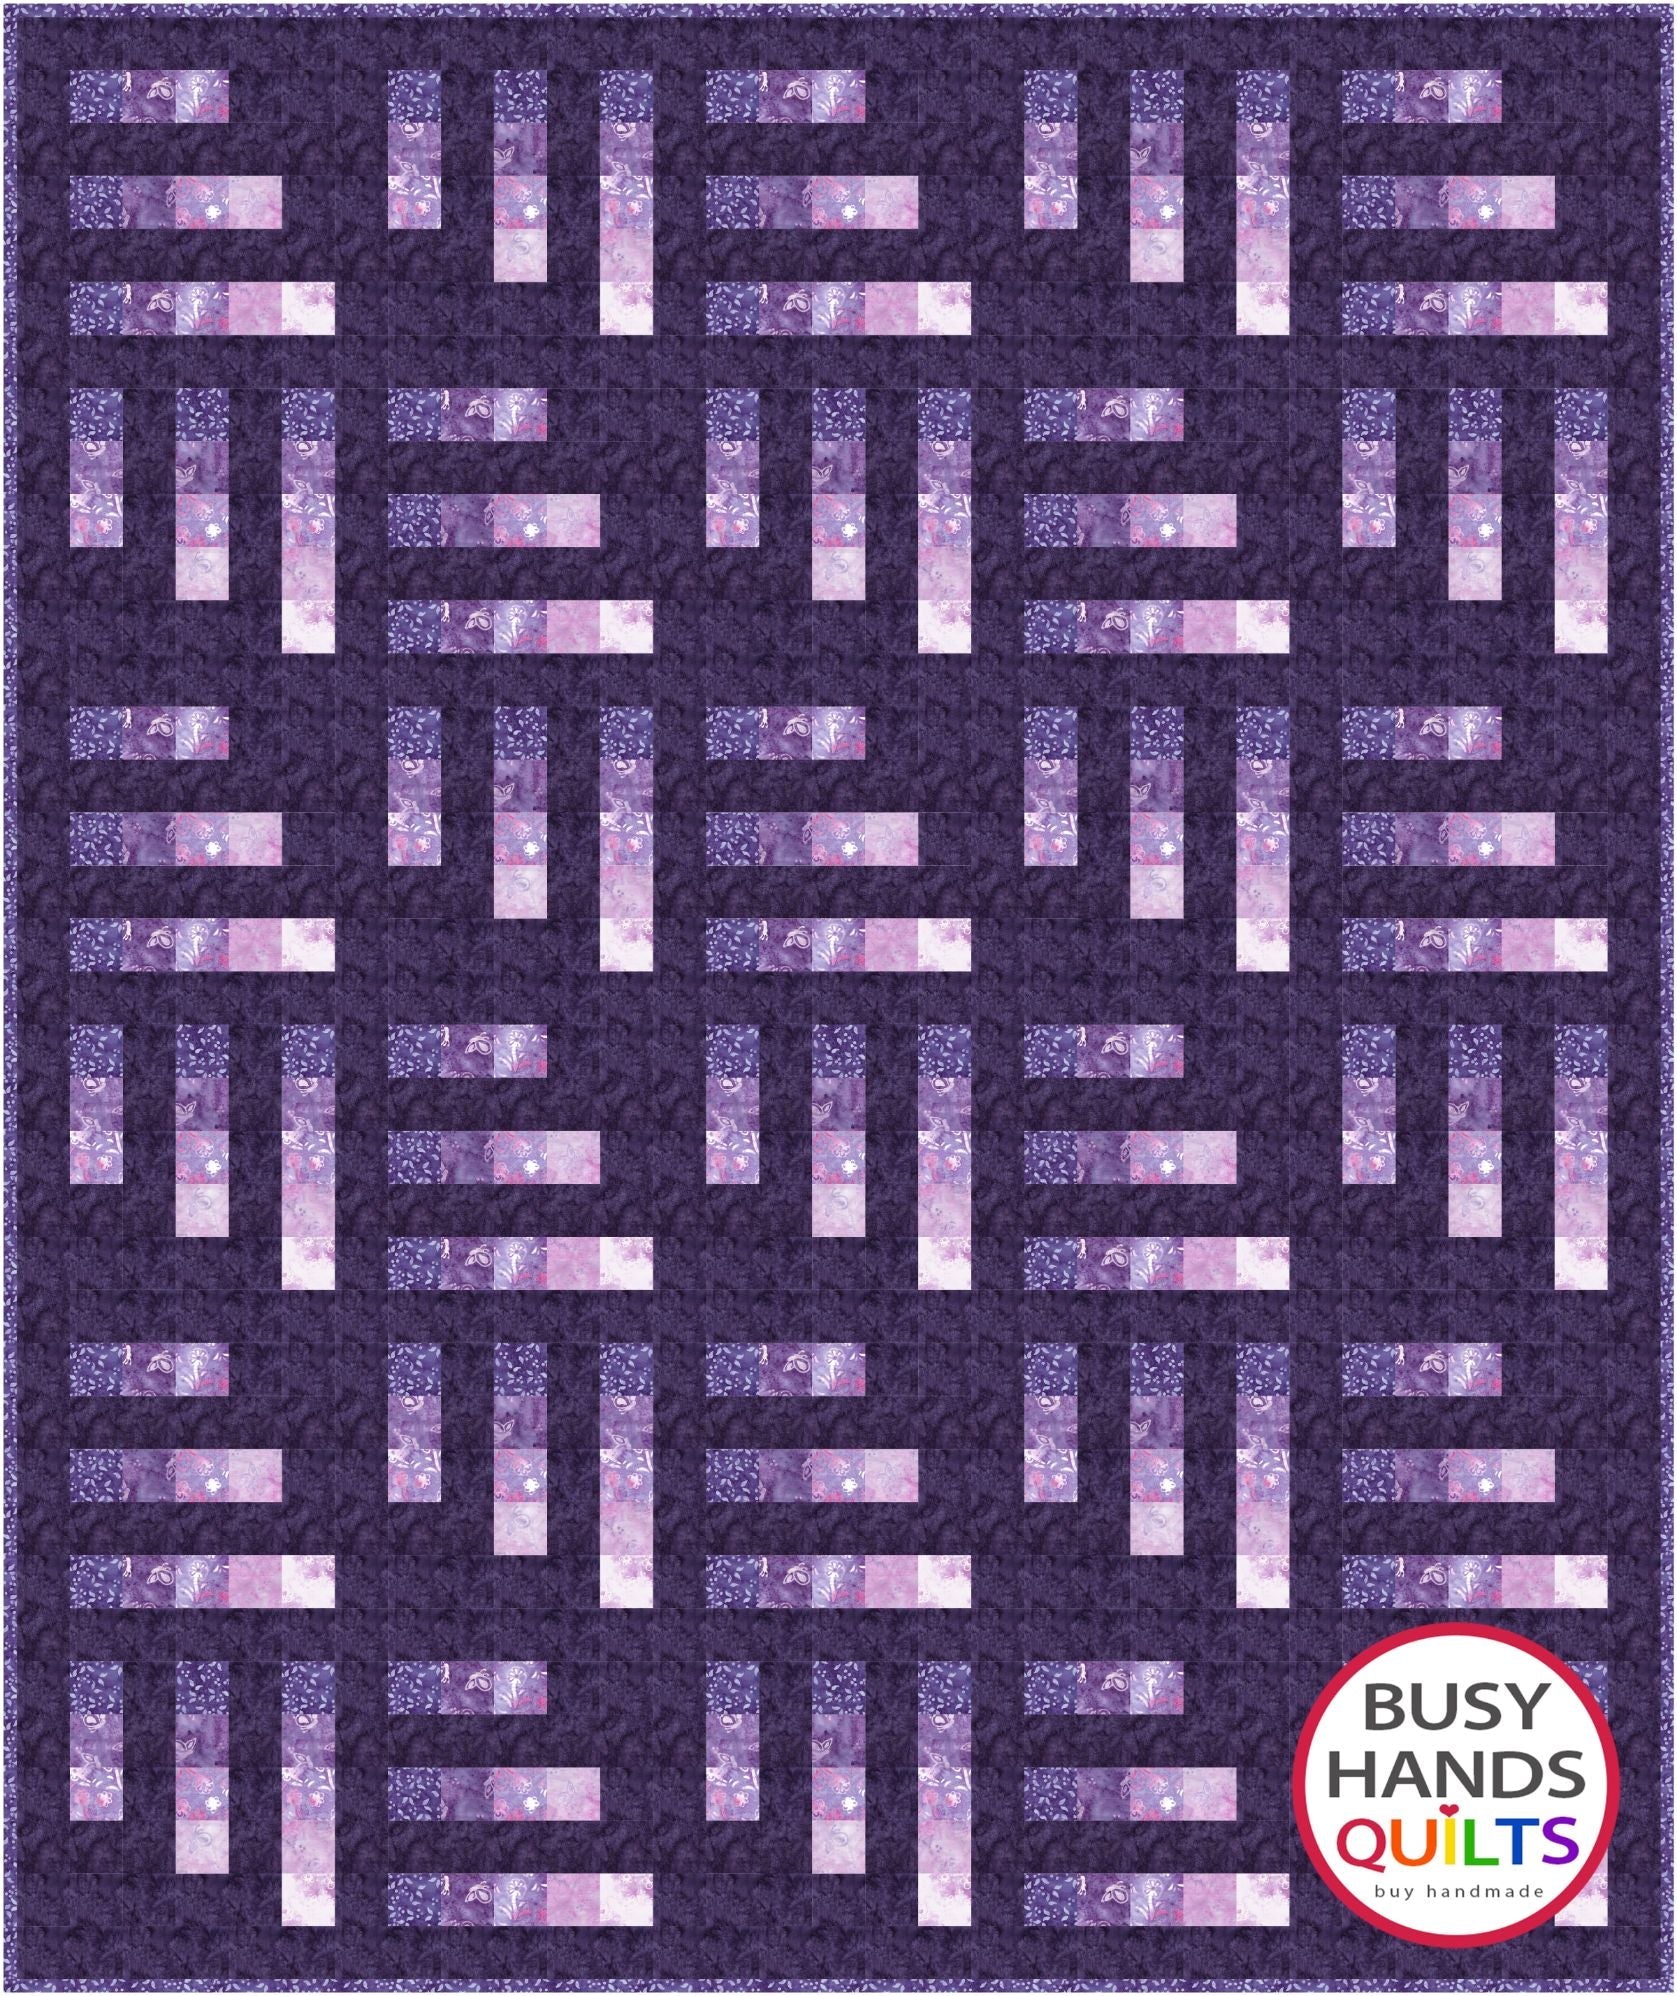 Good Morning Quilt Pattern PDF DOWNLOAD Busy Hands Quilts $12.99